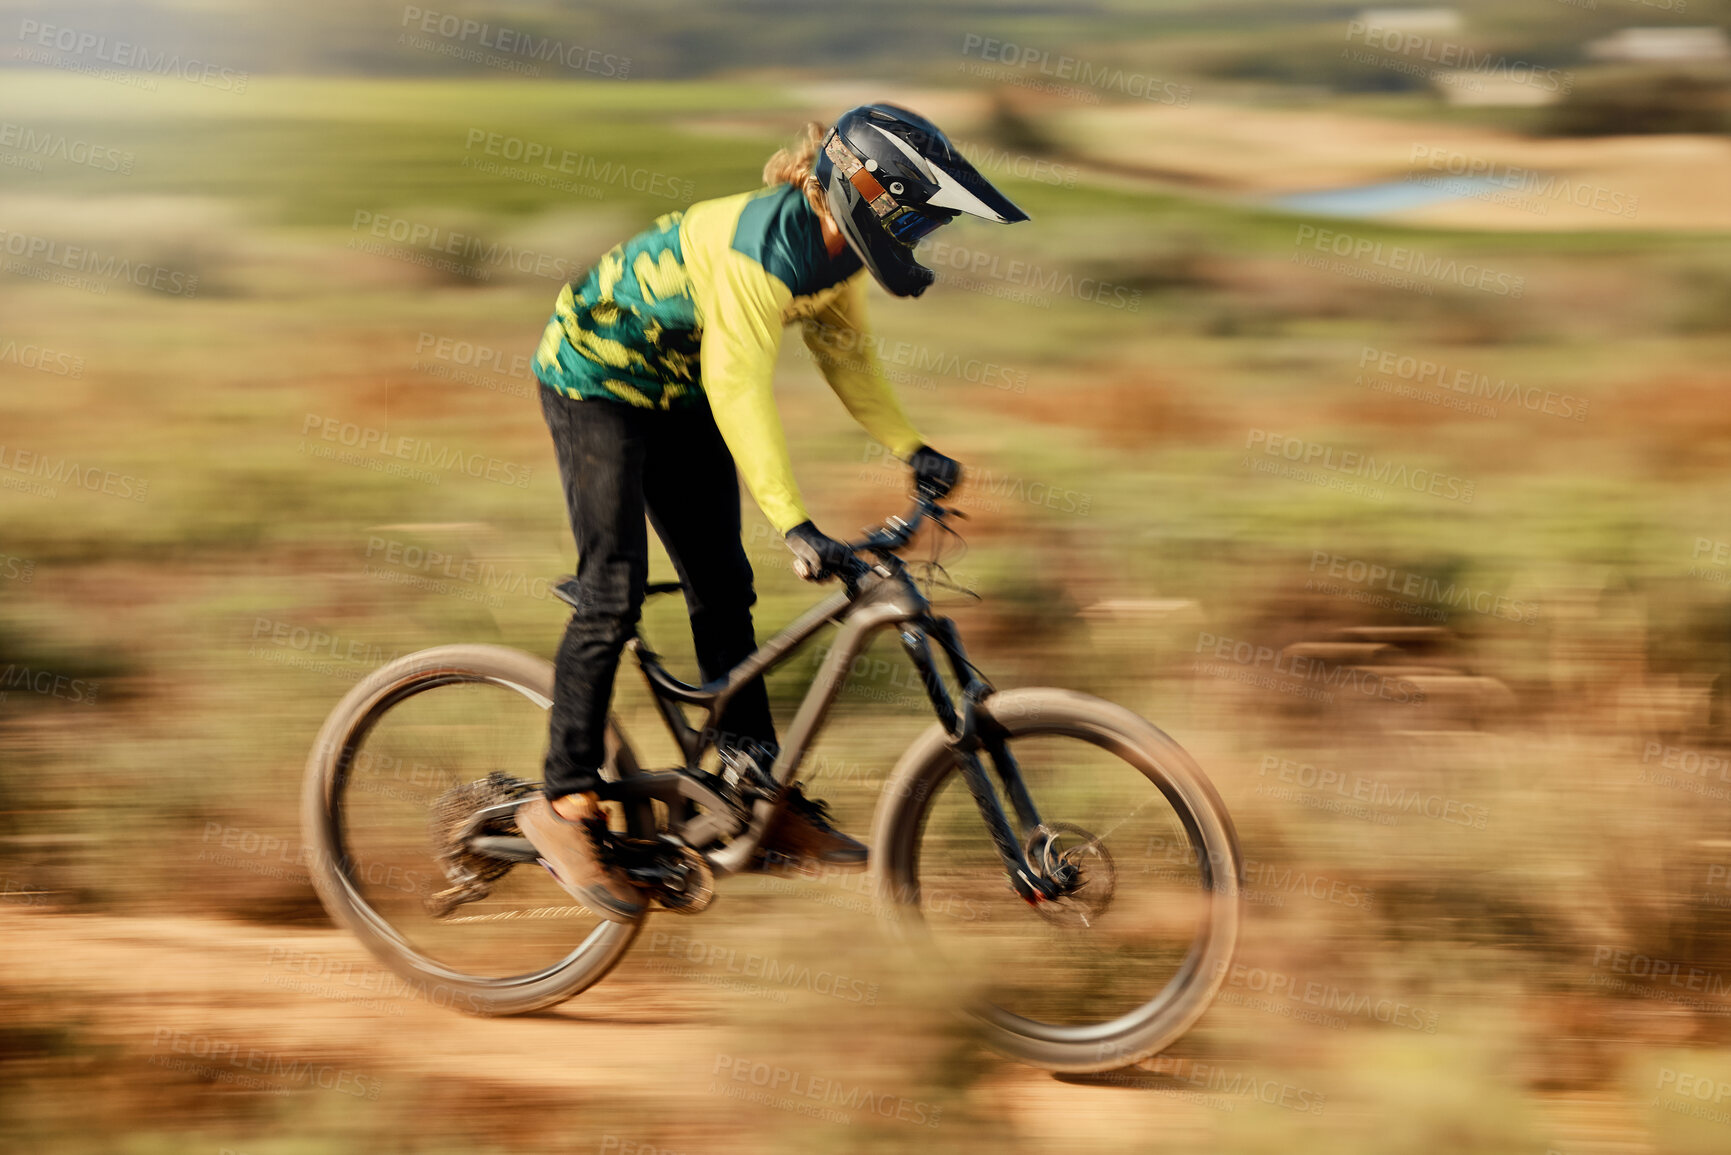 Buy stock photo Speed, action and man on mountain bike for dirt racing sports, riding on nature trail. Sports, mountain biking and blur of athlete cycling fast on dirt road for fitness, adrenaline and adventure